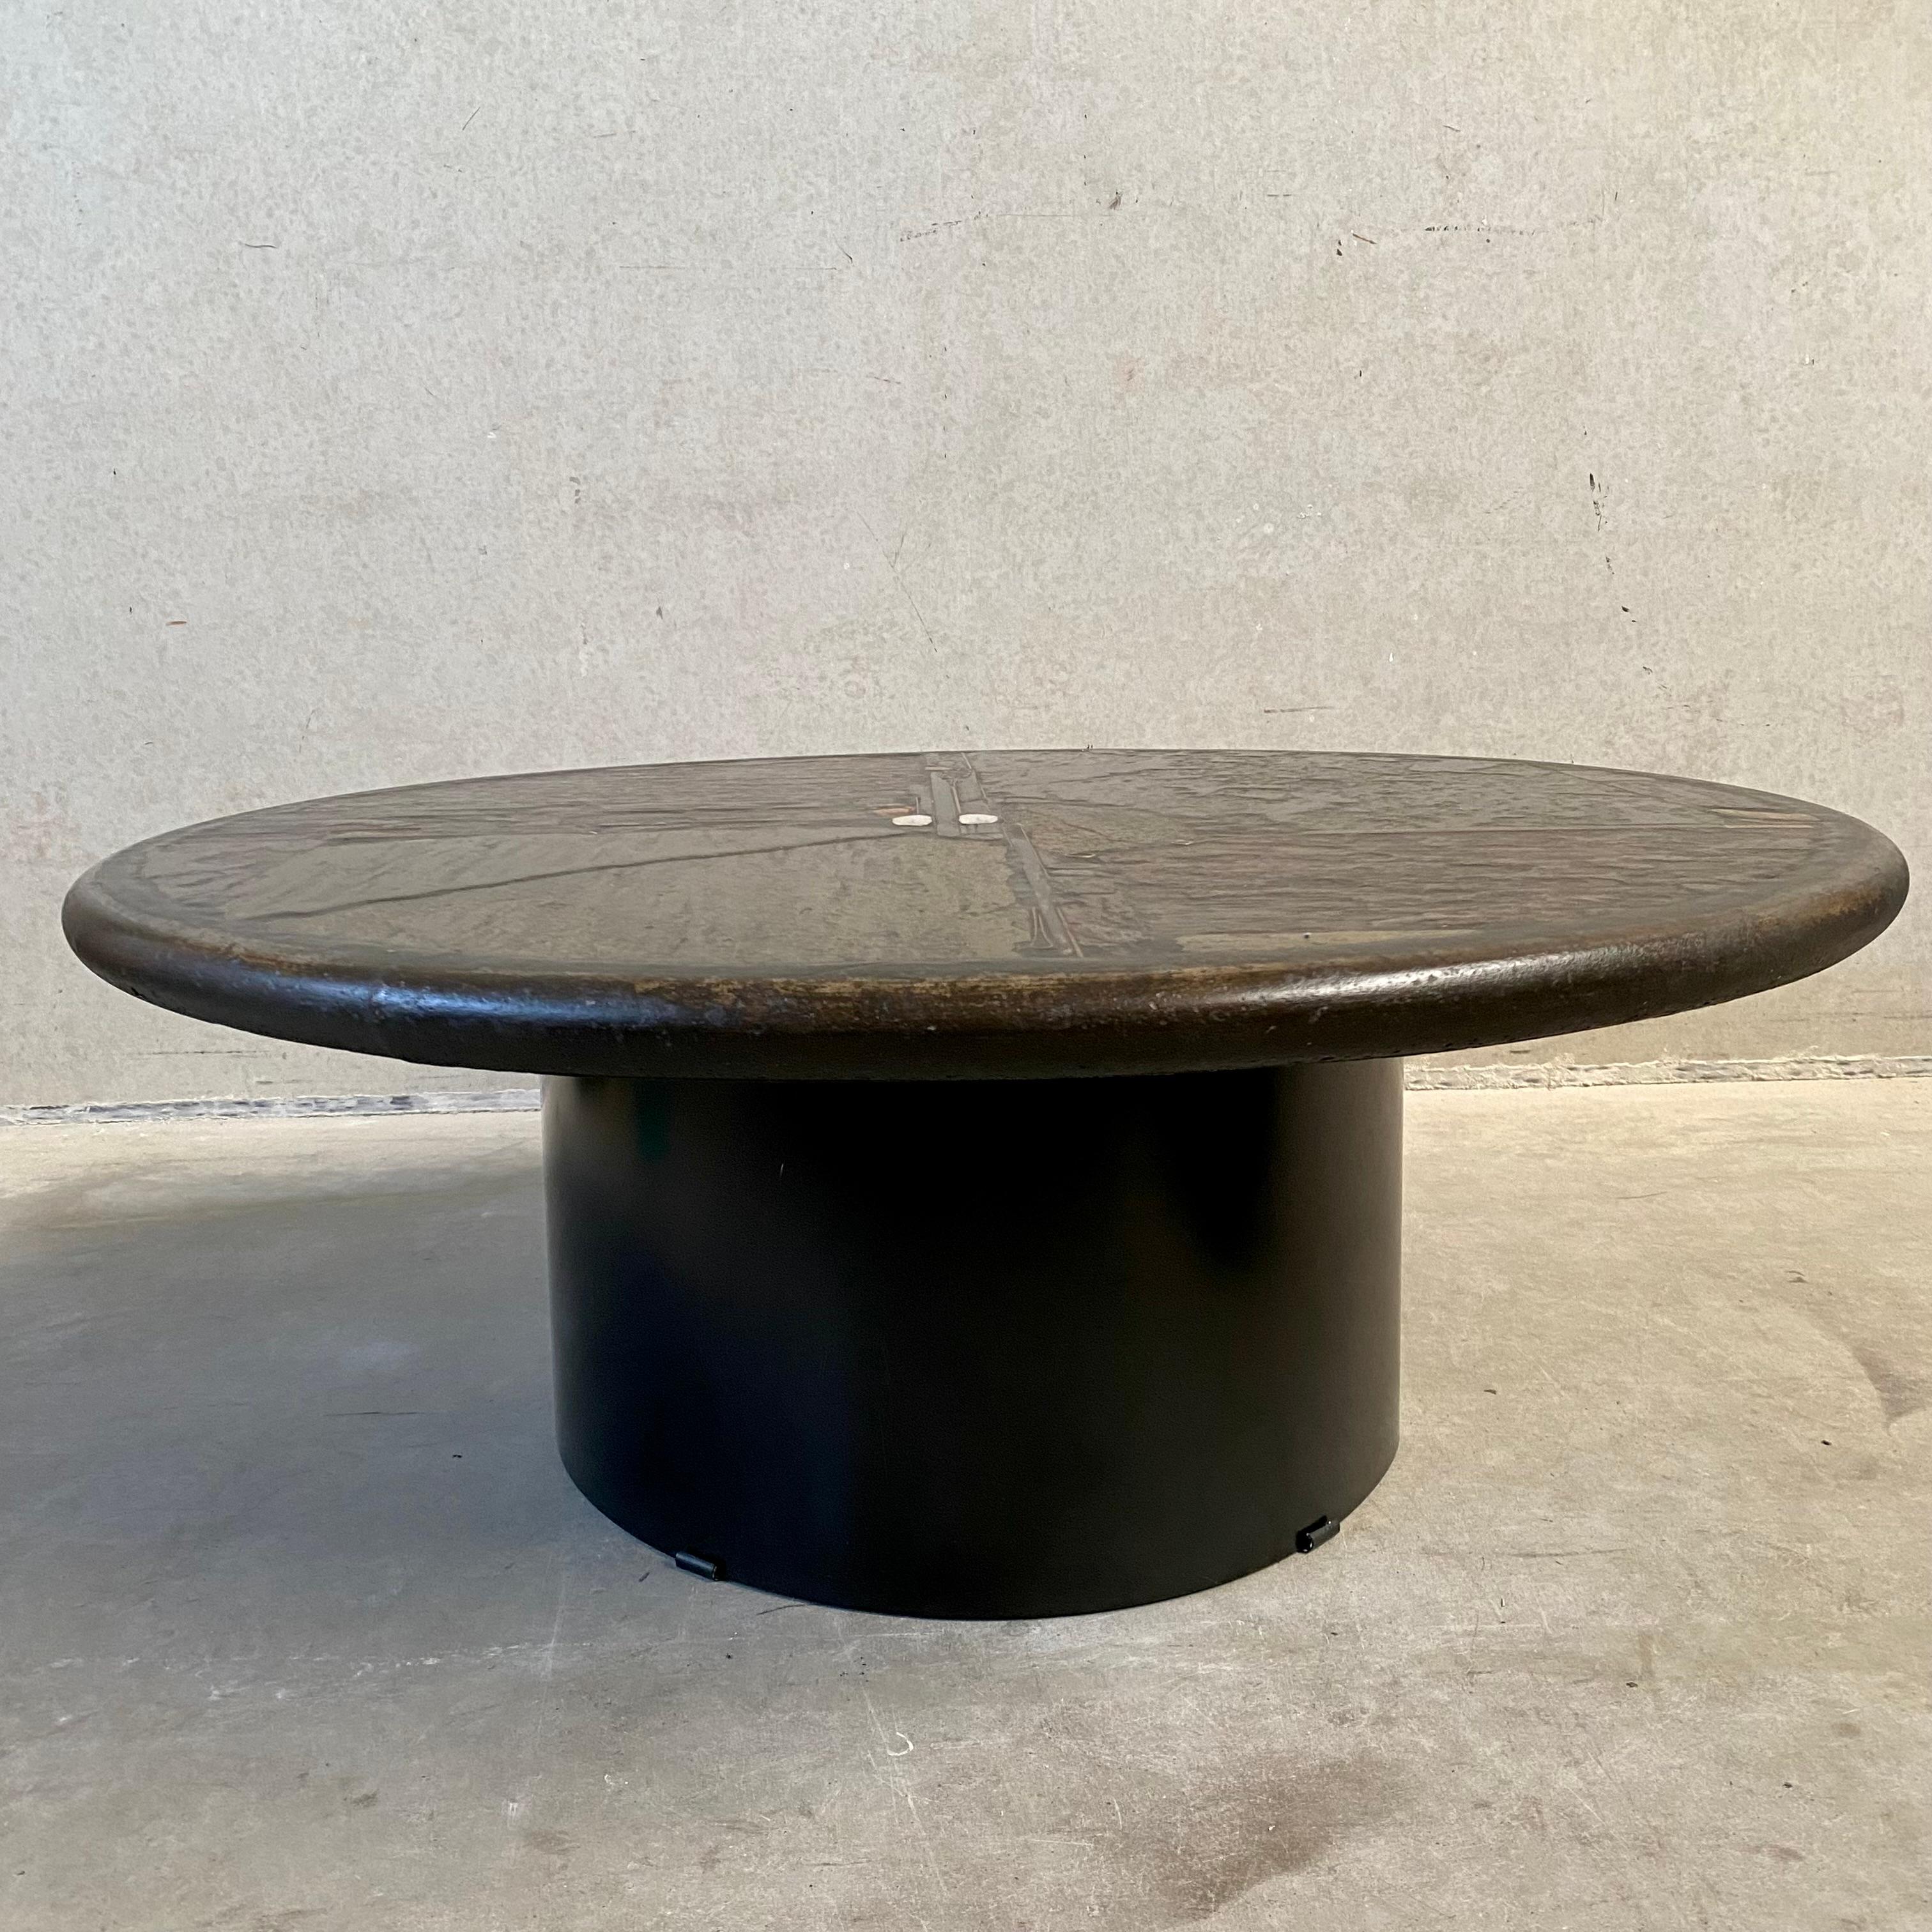 Late 20th Century Brutalist Round Coffee Table by Sculptor Paul Kingma, Netherlands, 1989